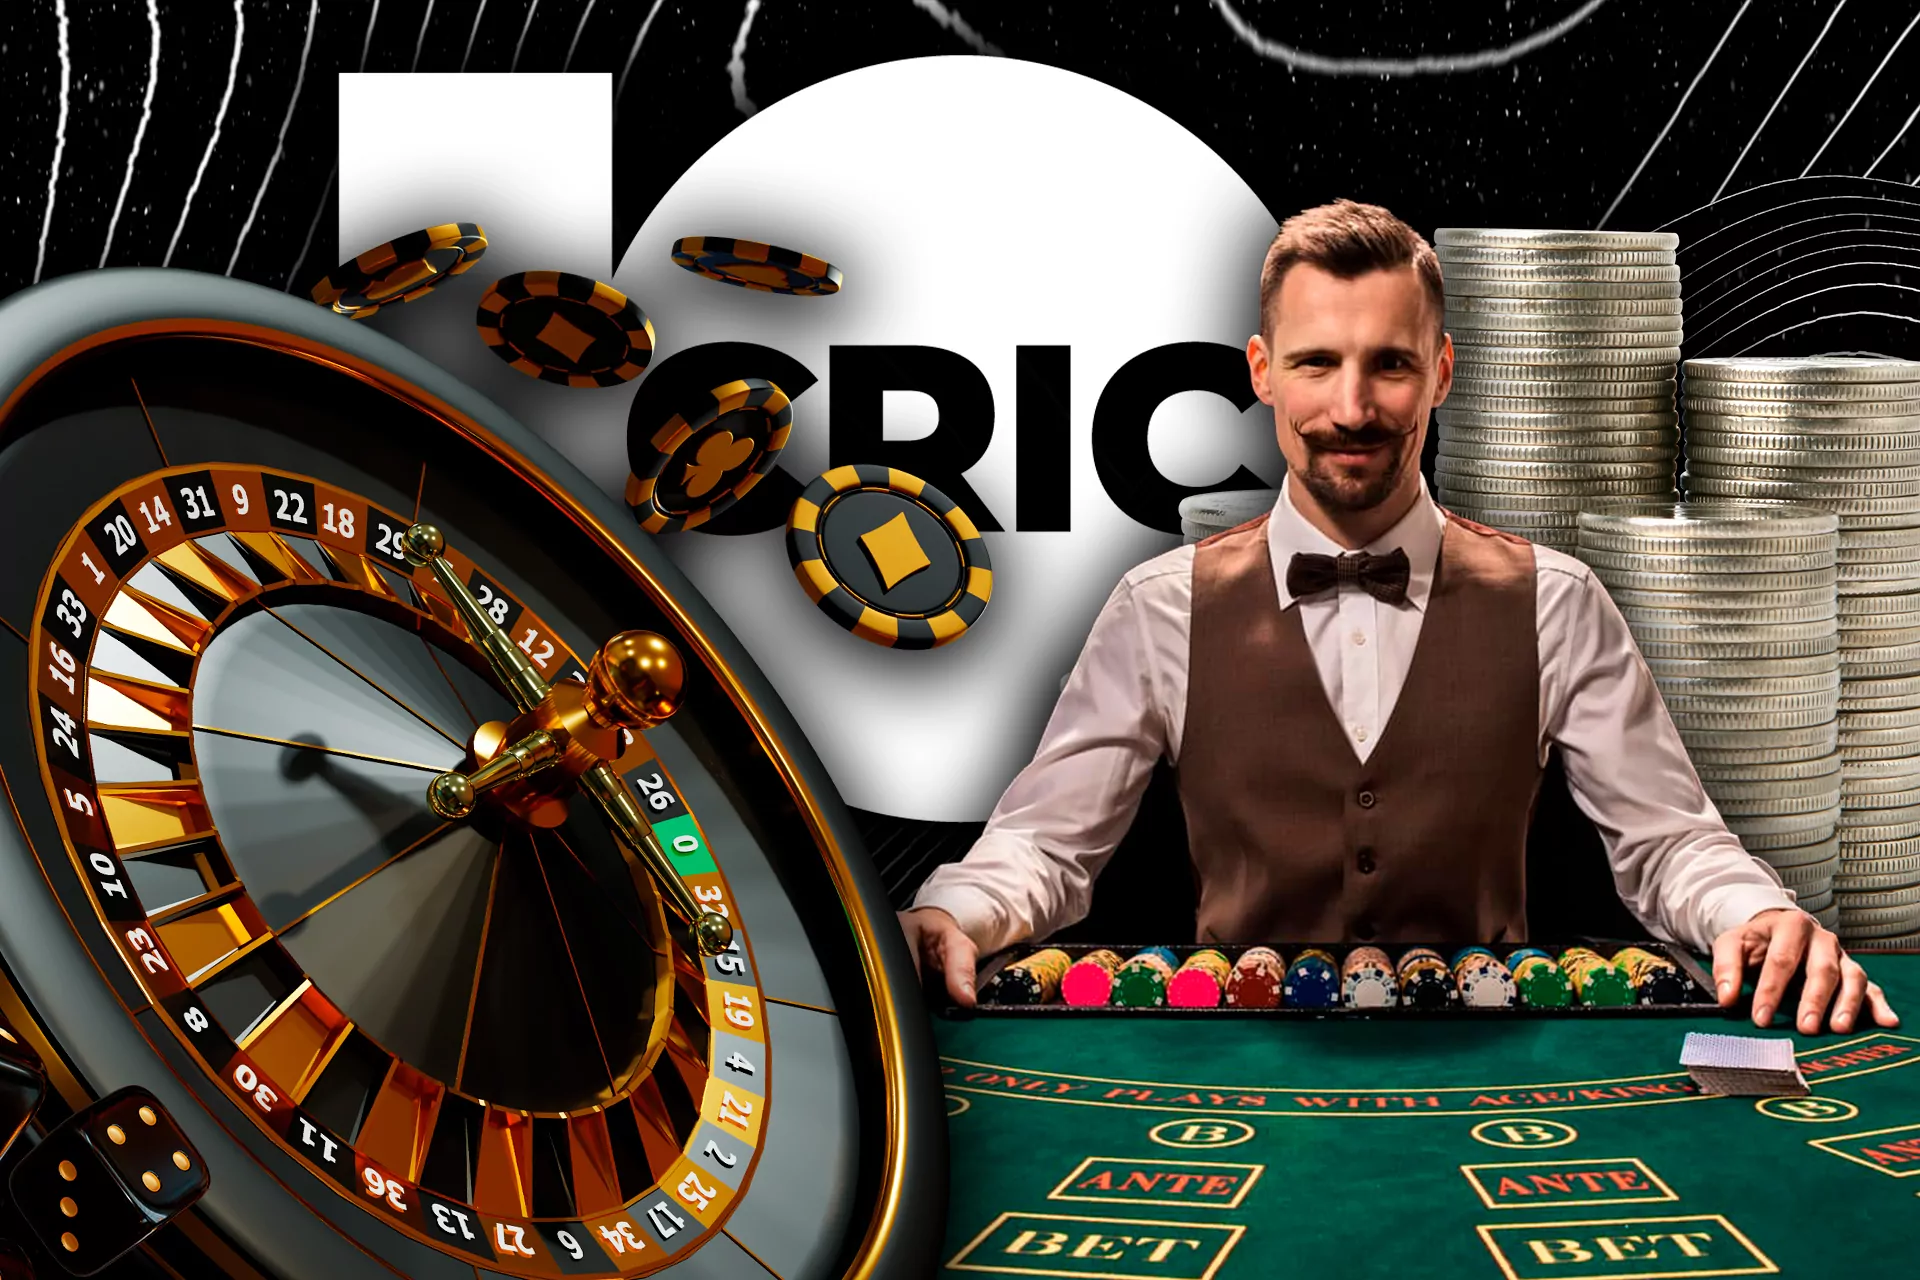 Playing games in the Live Casino, don't miss the chance to get a cashback increasing your deposit by 30%.